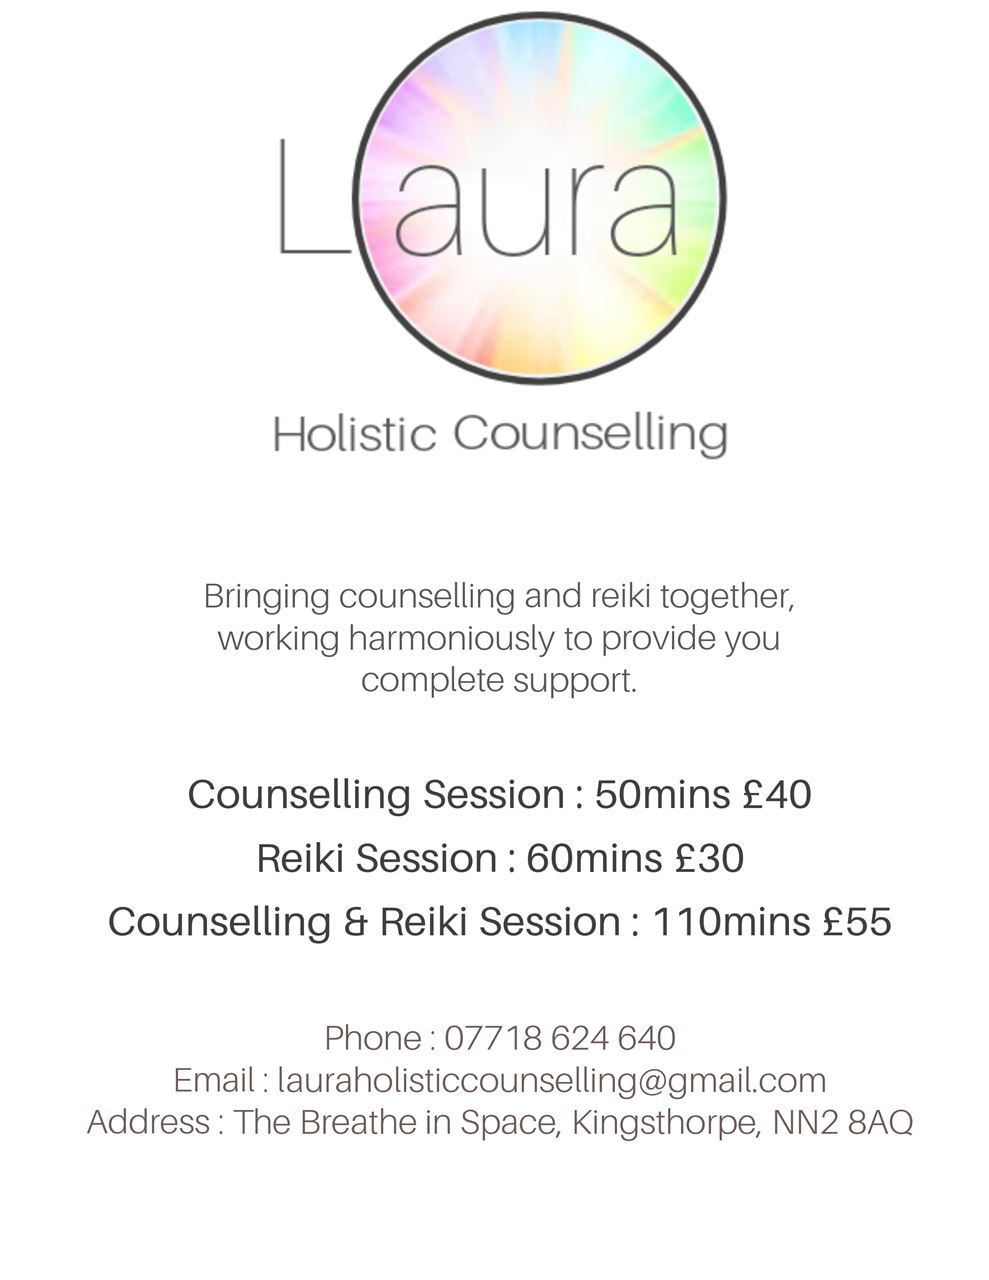 Holistic Counselling